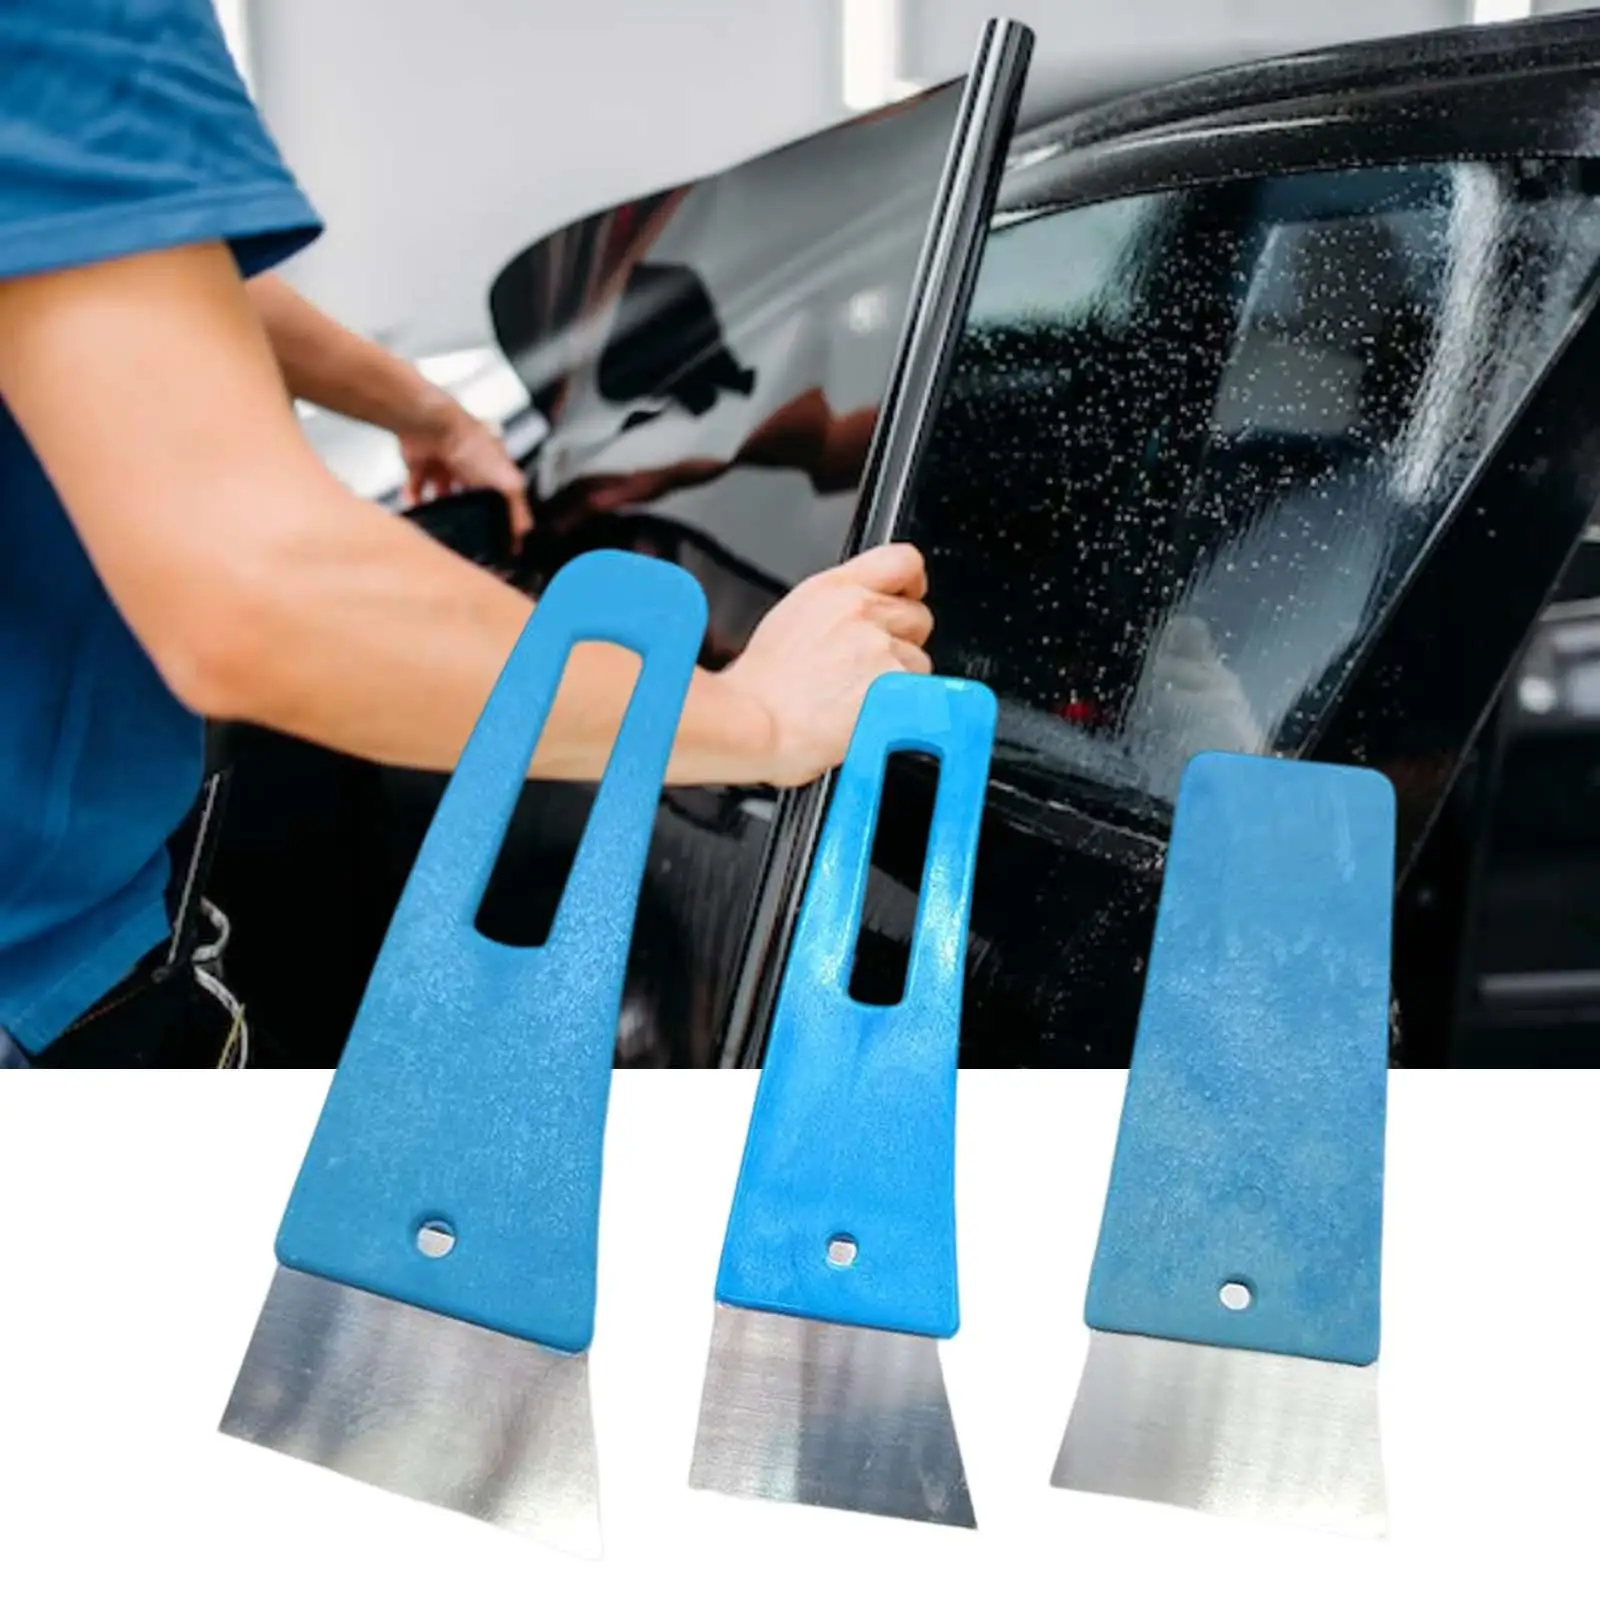 Set of 3Pcs Car Window Film Scraper Squeegee Set Universal for Paint Protection Film